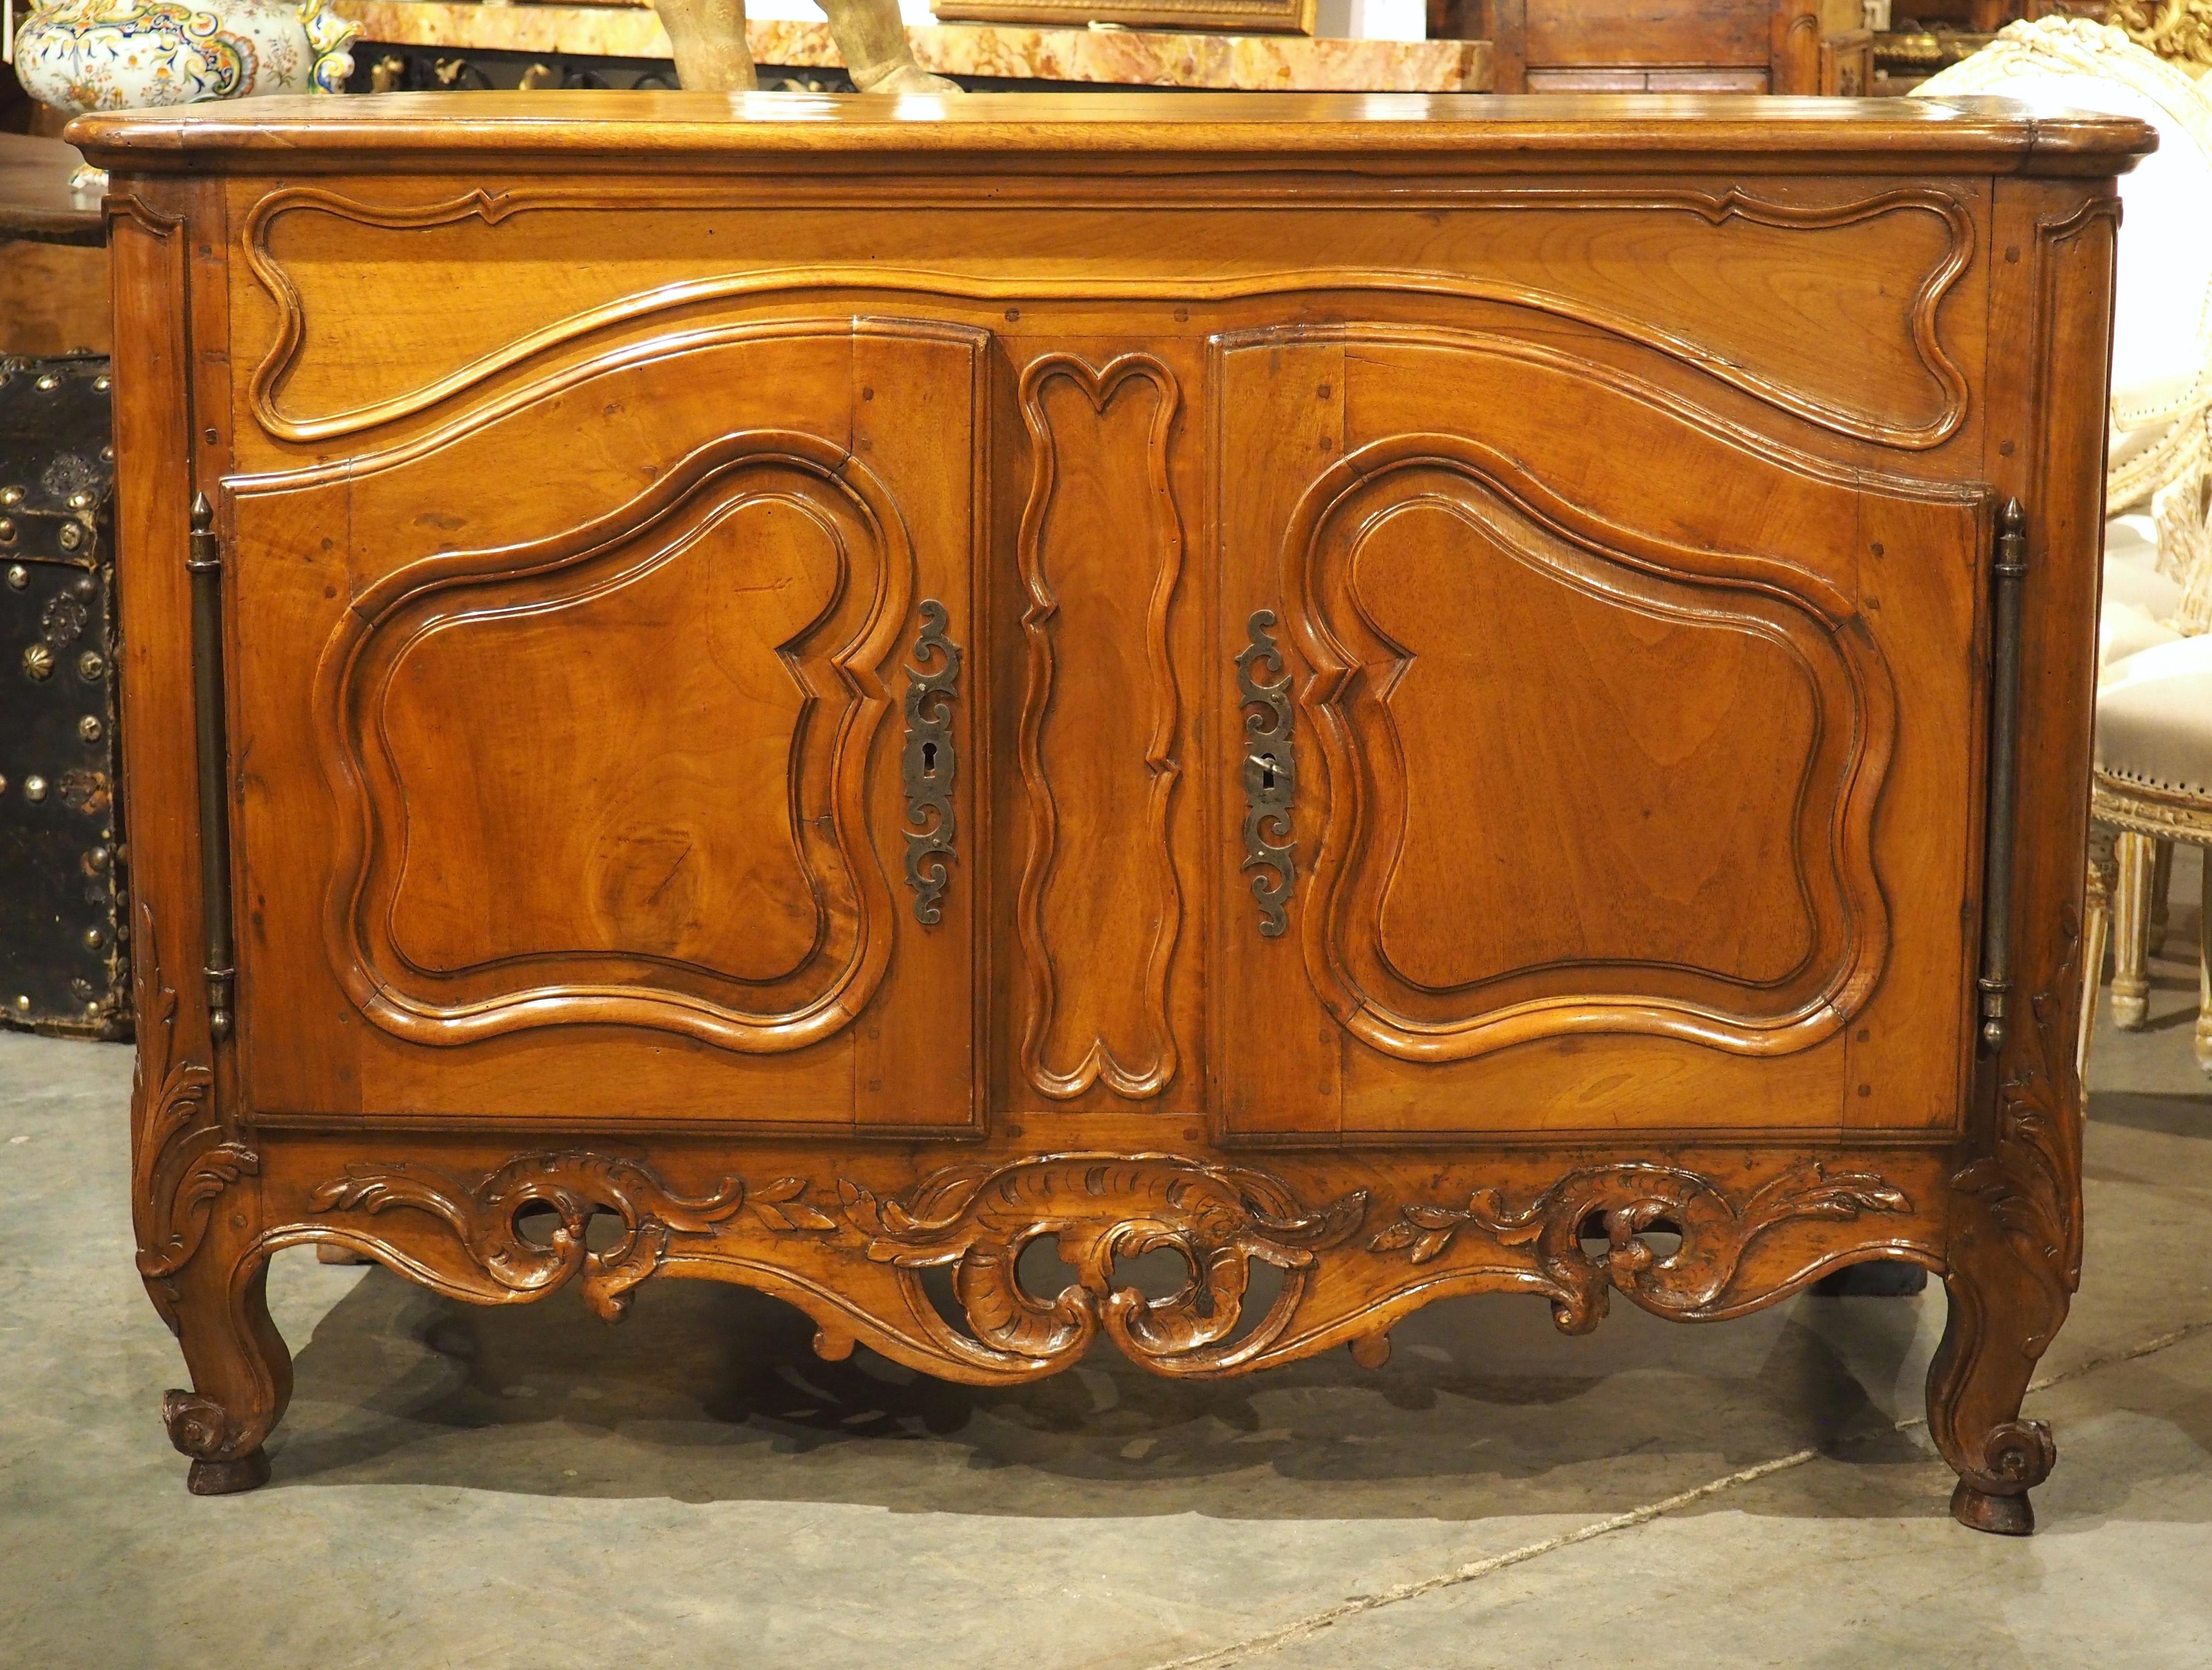 Louis XV Circa 1750 Carved Walnut Wood Buffet Crédence from Nîmes, France